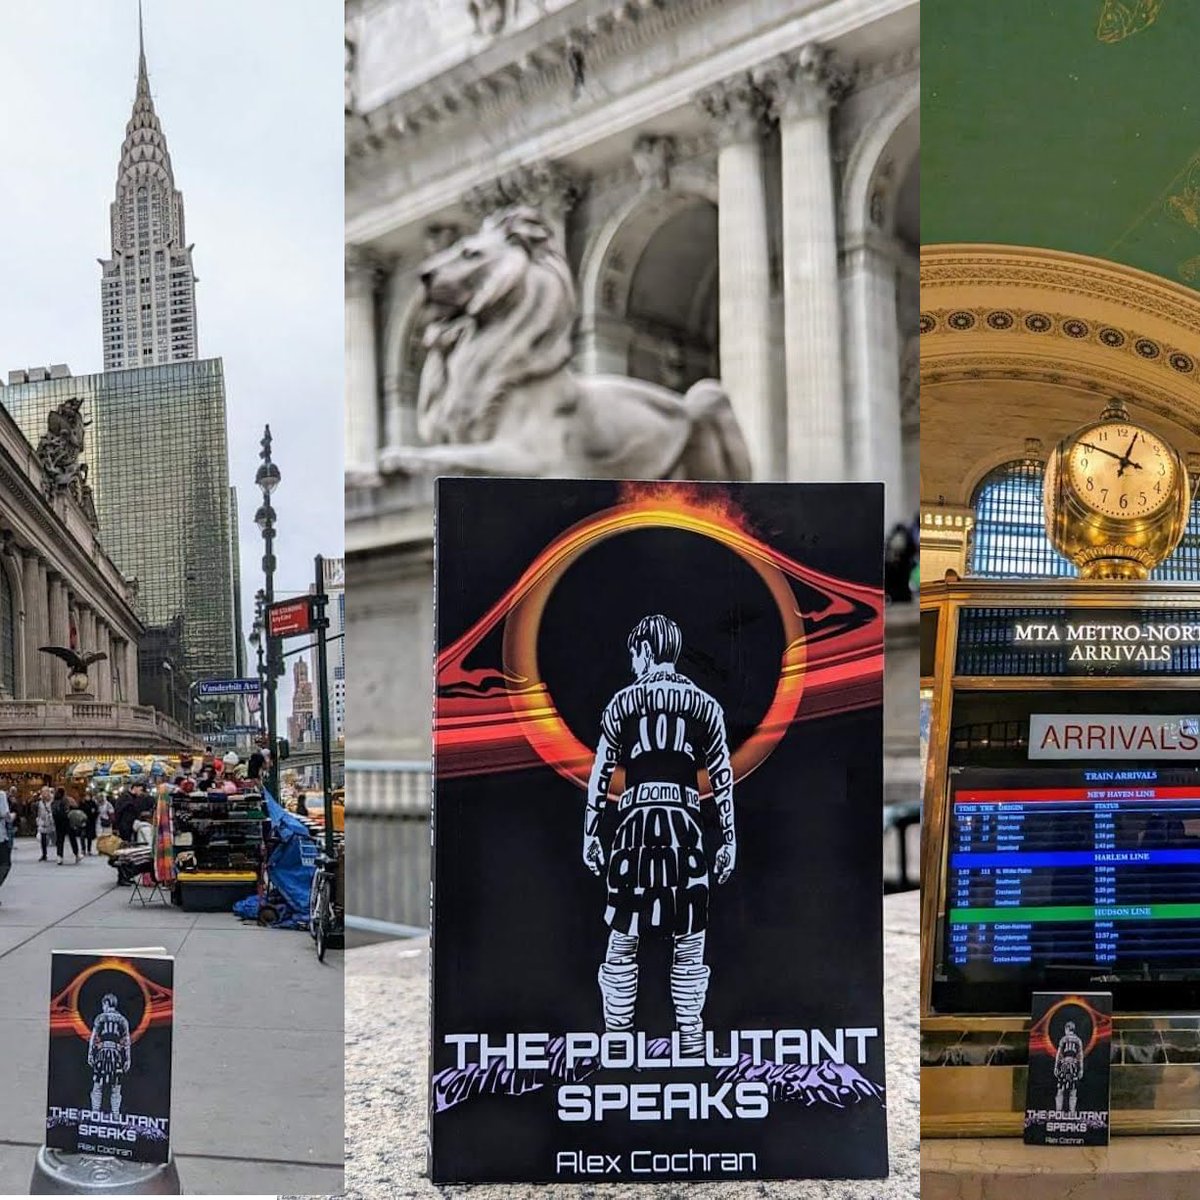 The Pollutant Speaks on a tour of the Big Apple 🍏 You know, this book is having more fun than I am.

amzn.eu/d/fHkIJK0

#sfbook #NewYork #sciencefiction #books #booklovers #booktwitter